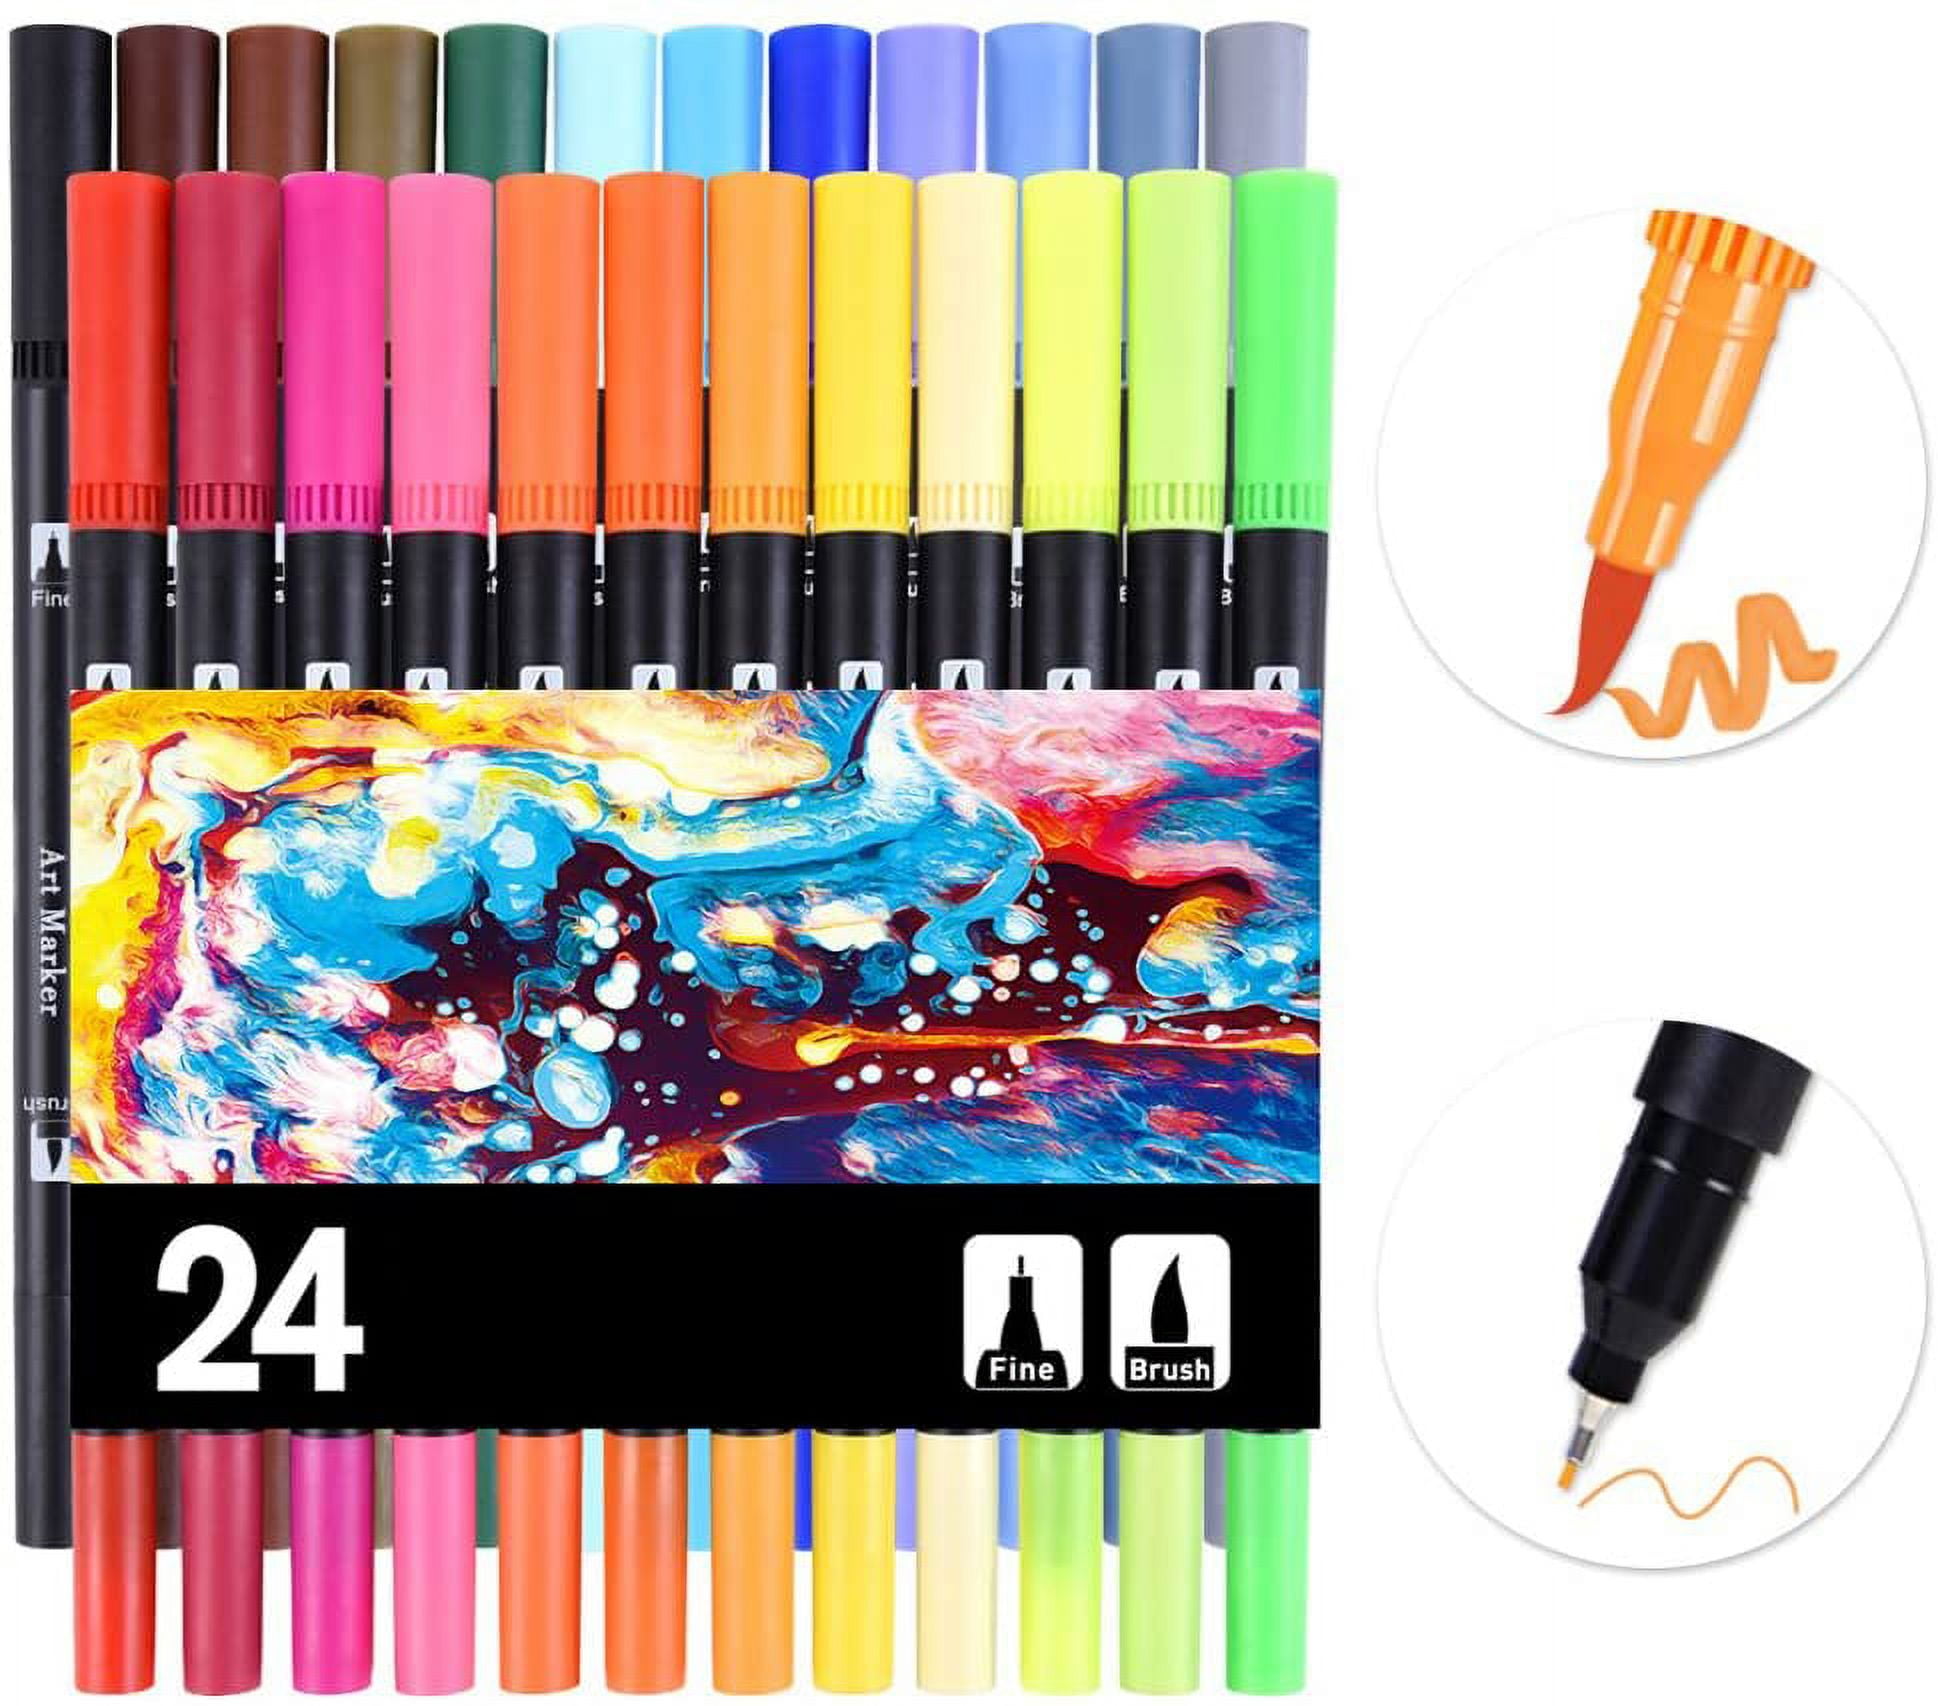 24x Sketch Pens Multi Shades w/ scale Set Waterproof Markers for